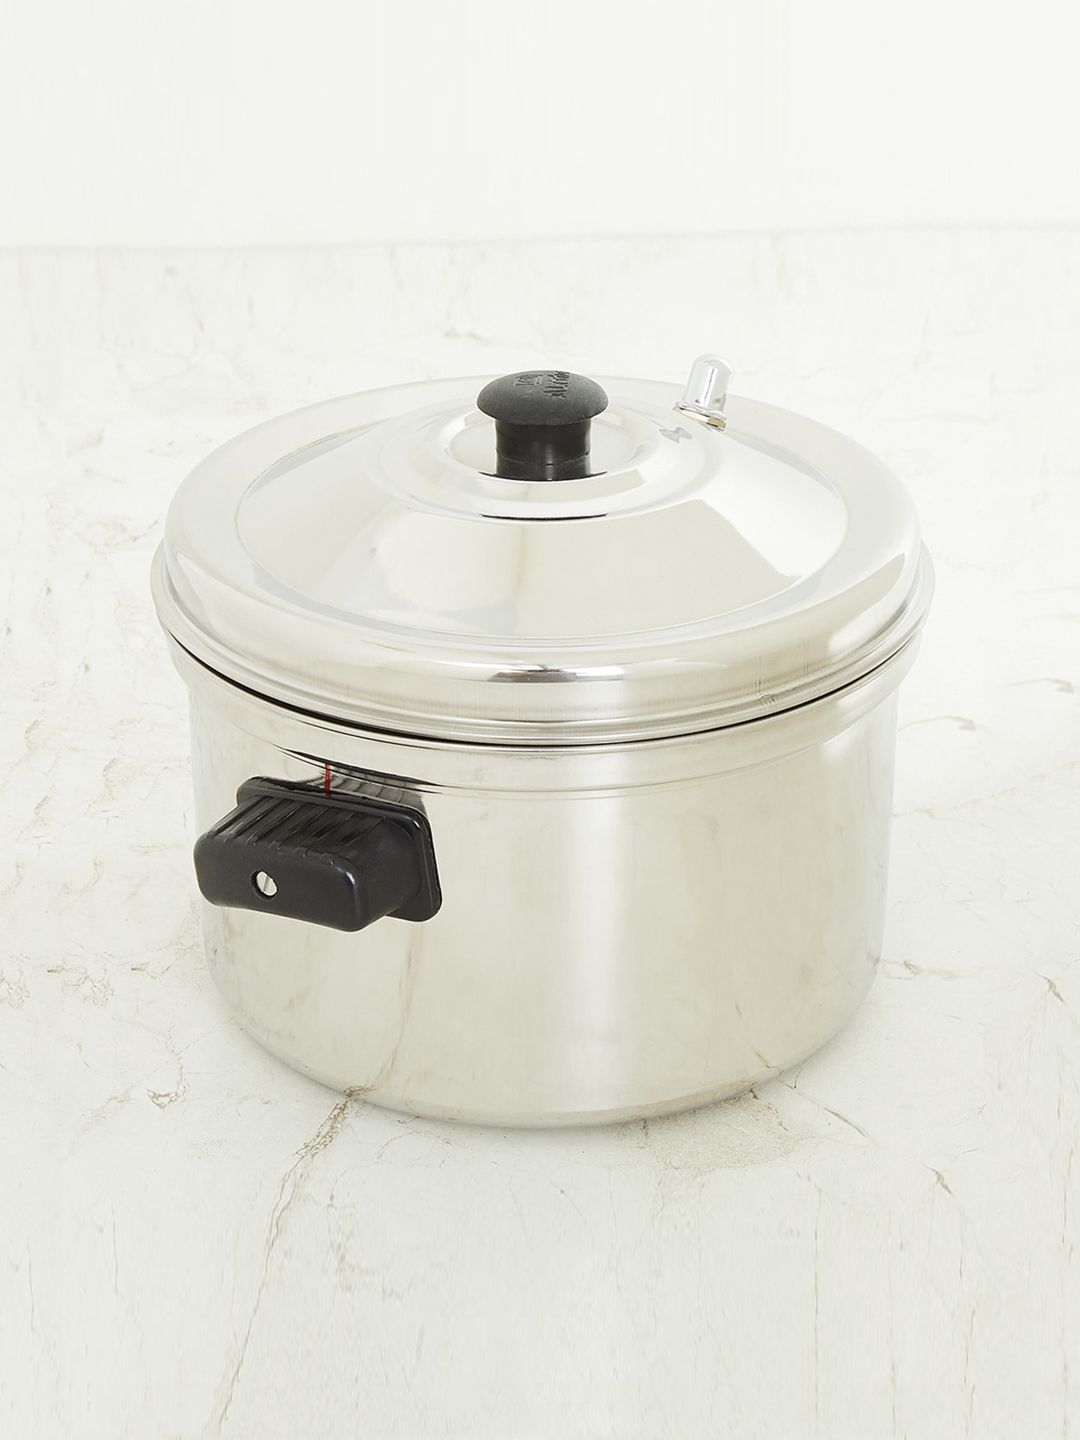 Home Centre Silver Corsica Stainless Steel Idli Pot Price in India